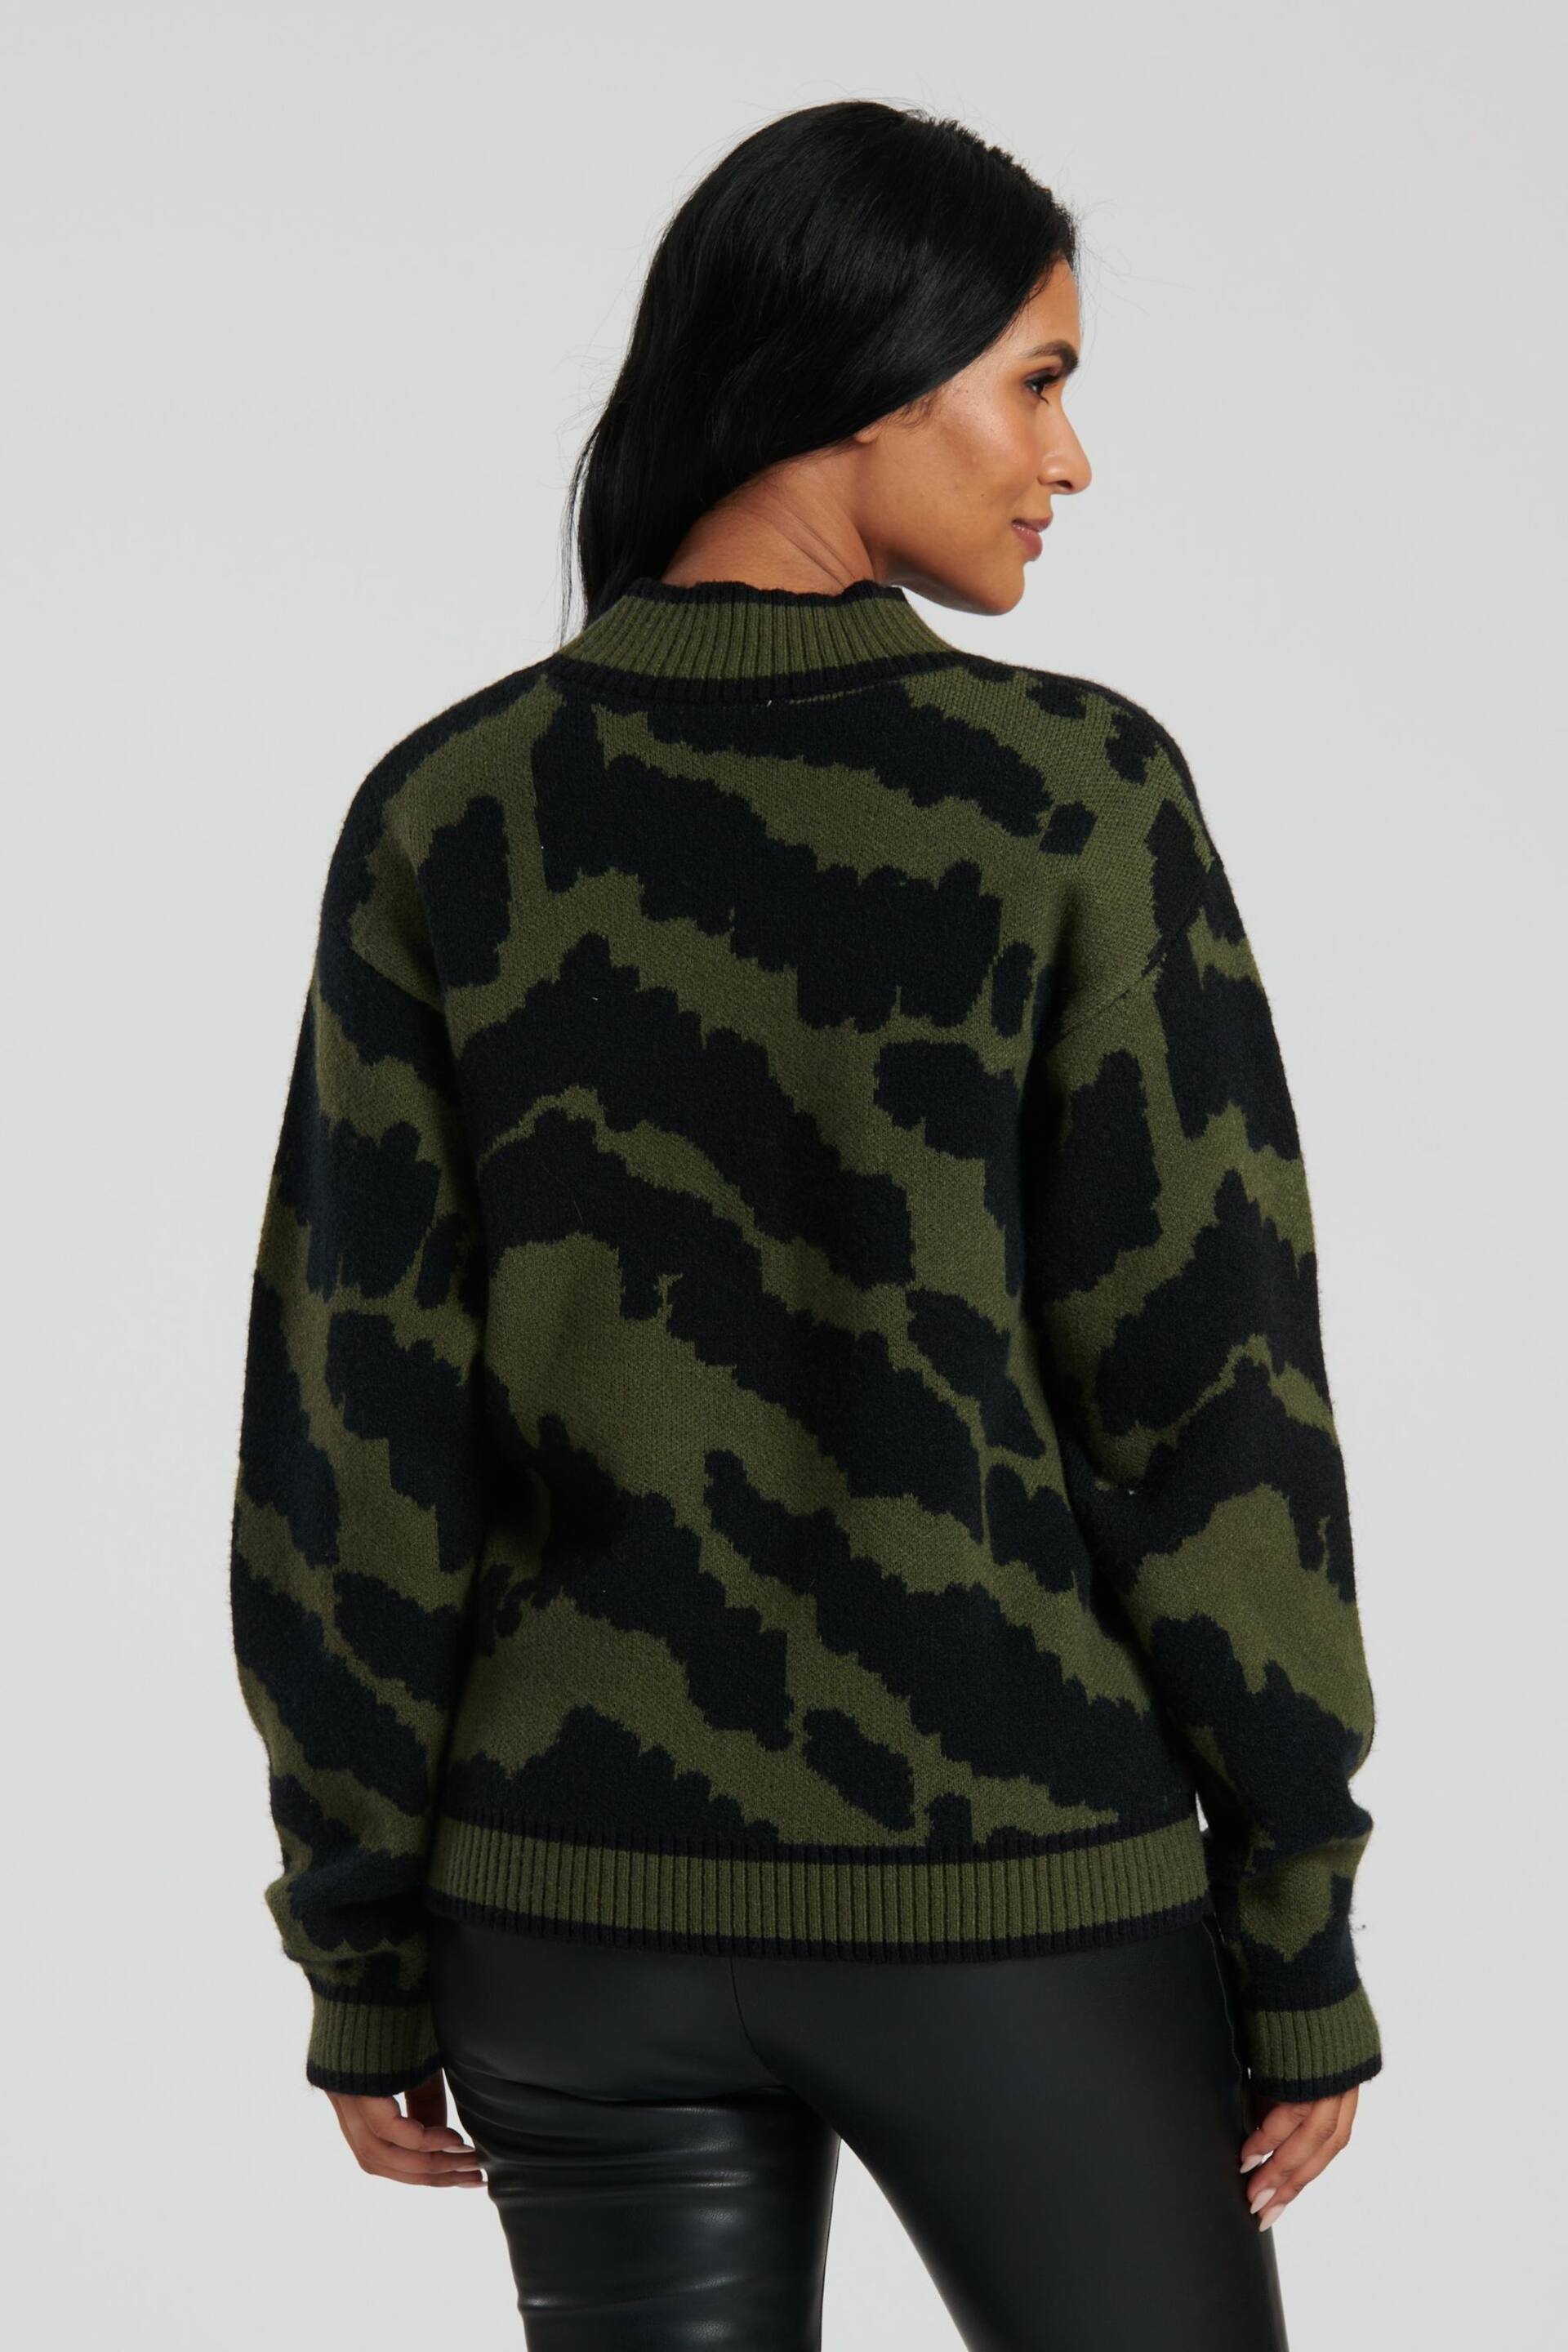 South Beach Green Funnel Neck Knit Jumper - Image 2 of 4